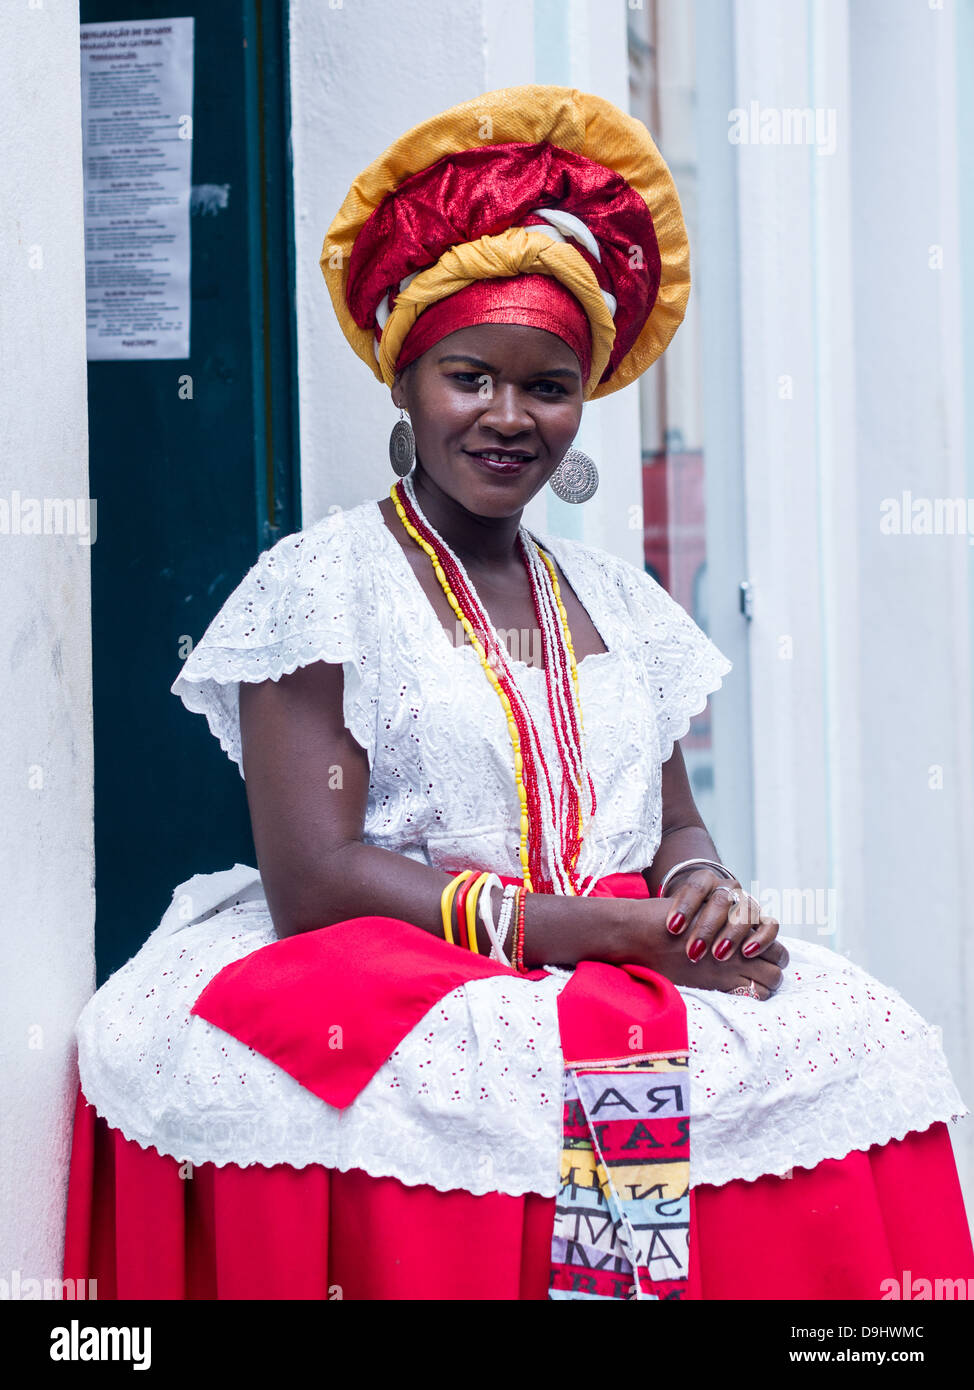 Woman wearing traditional clothes from the Bahia region of Brazil encourages tourists o buy souvenirs in Salvador. Stock Photo